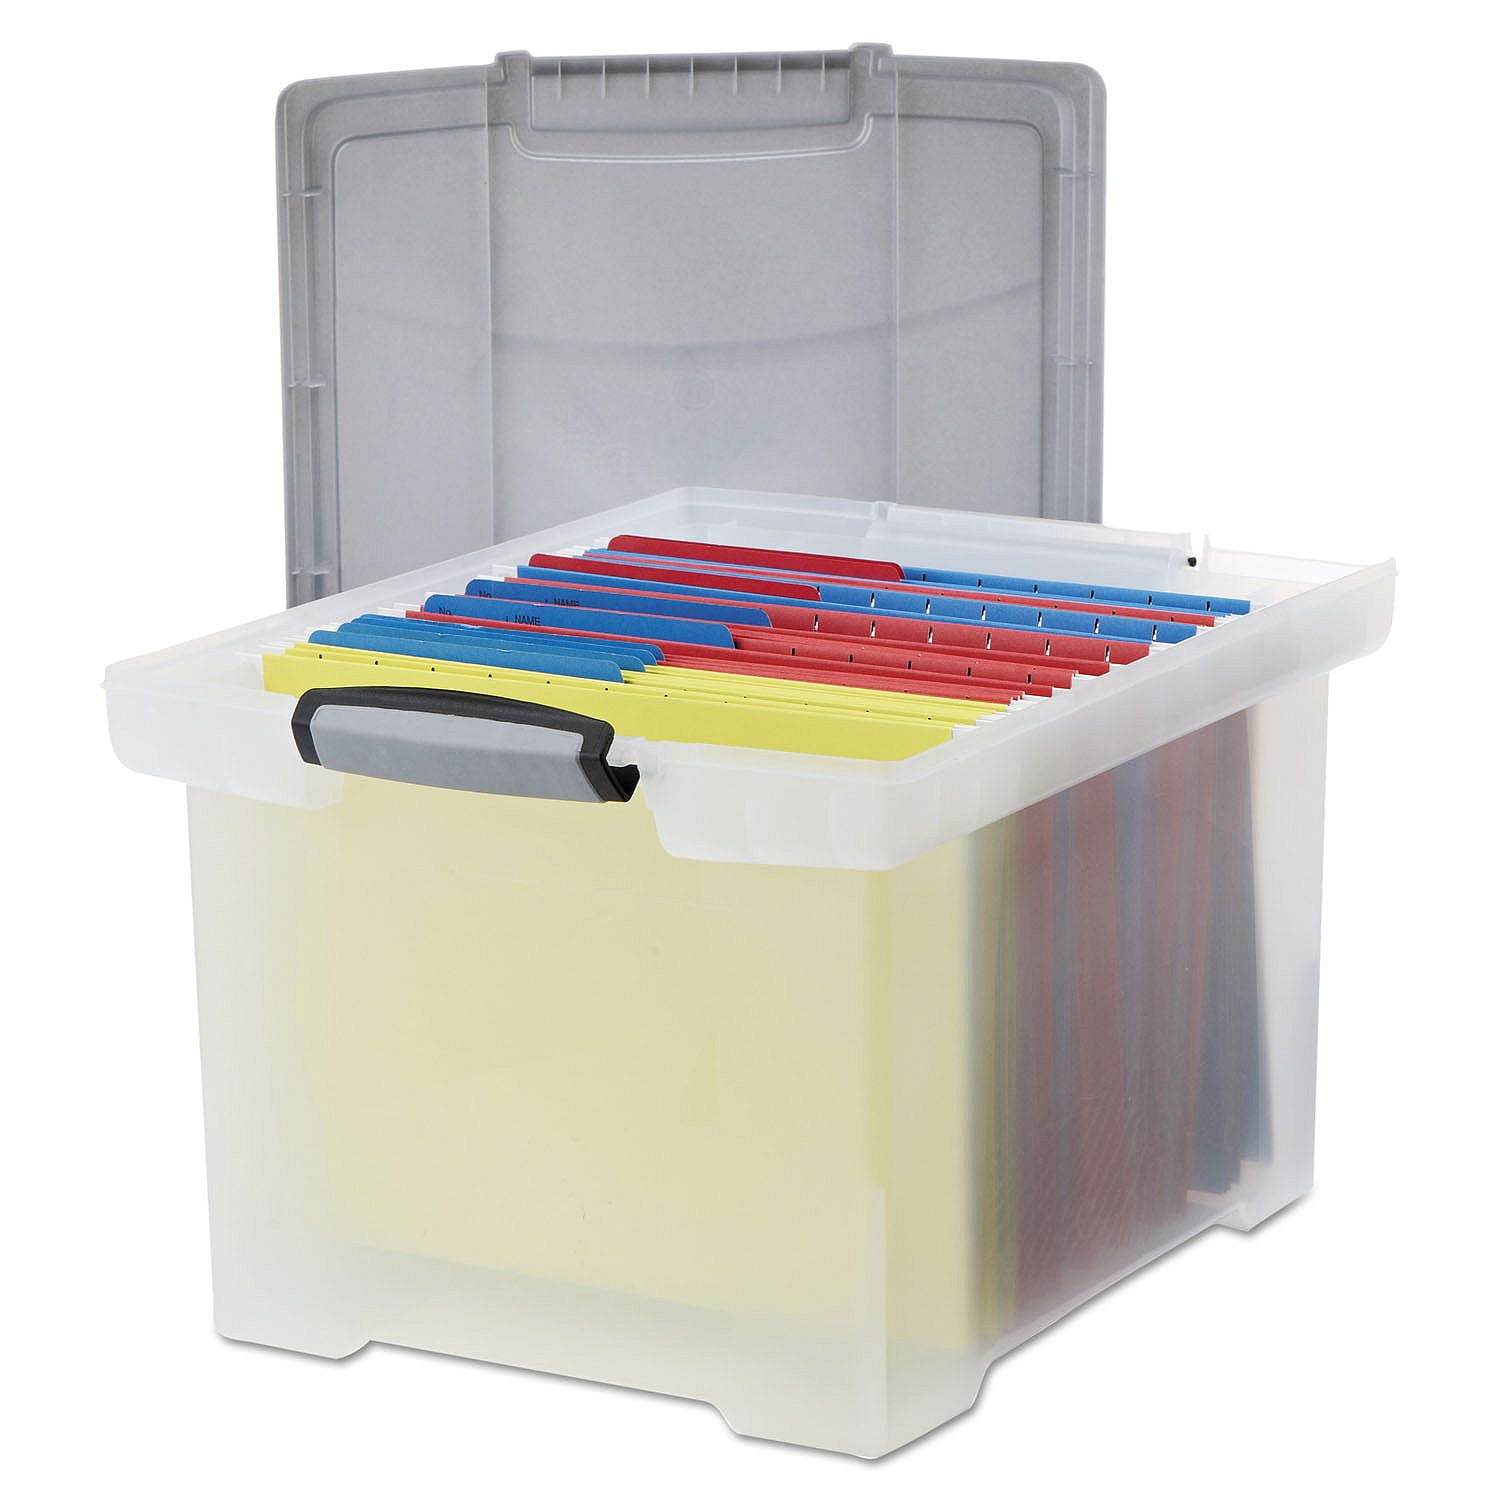 Storex Portable File Box with Organizer Lid 17.13 x 9.63 x 11 Inches, 